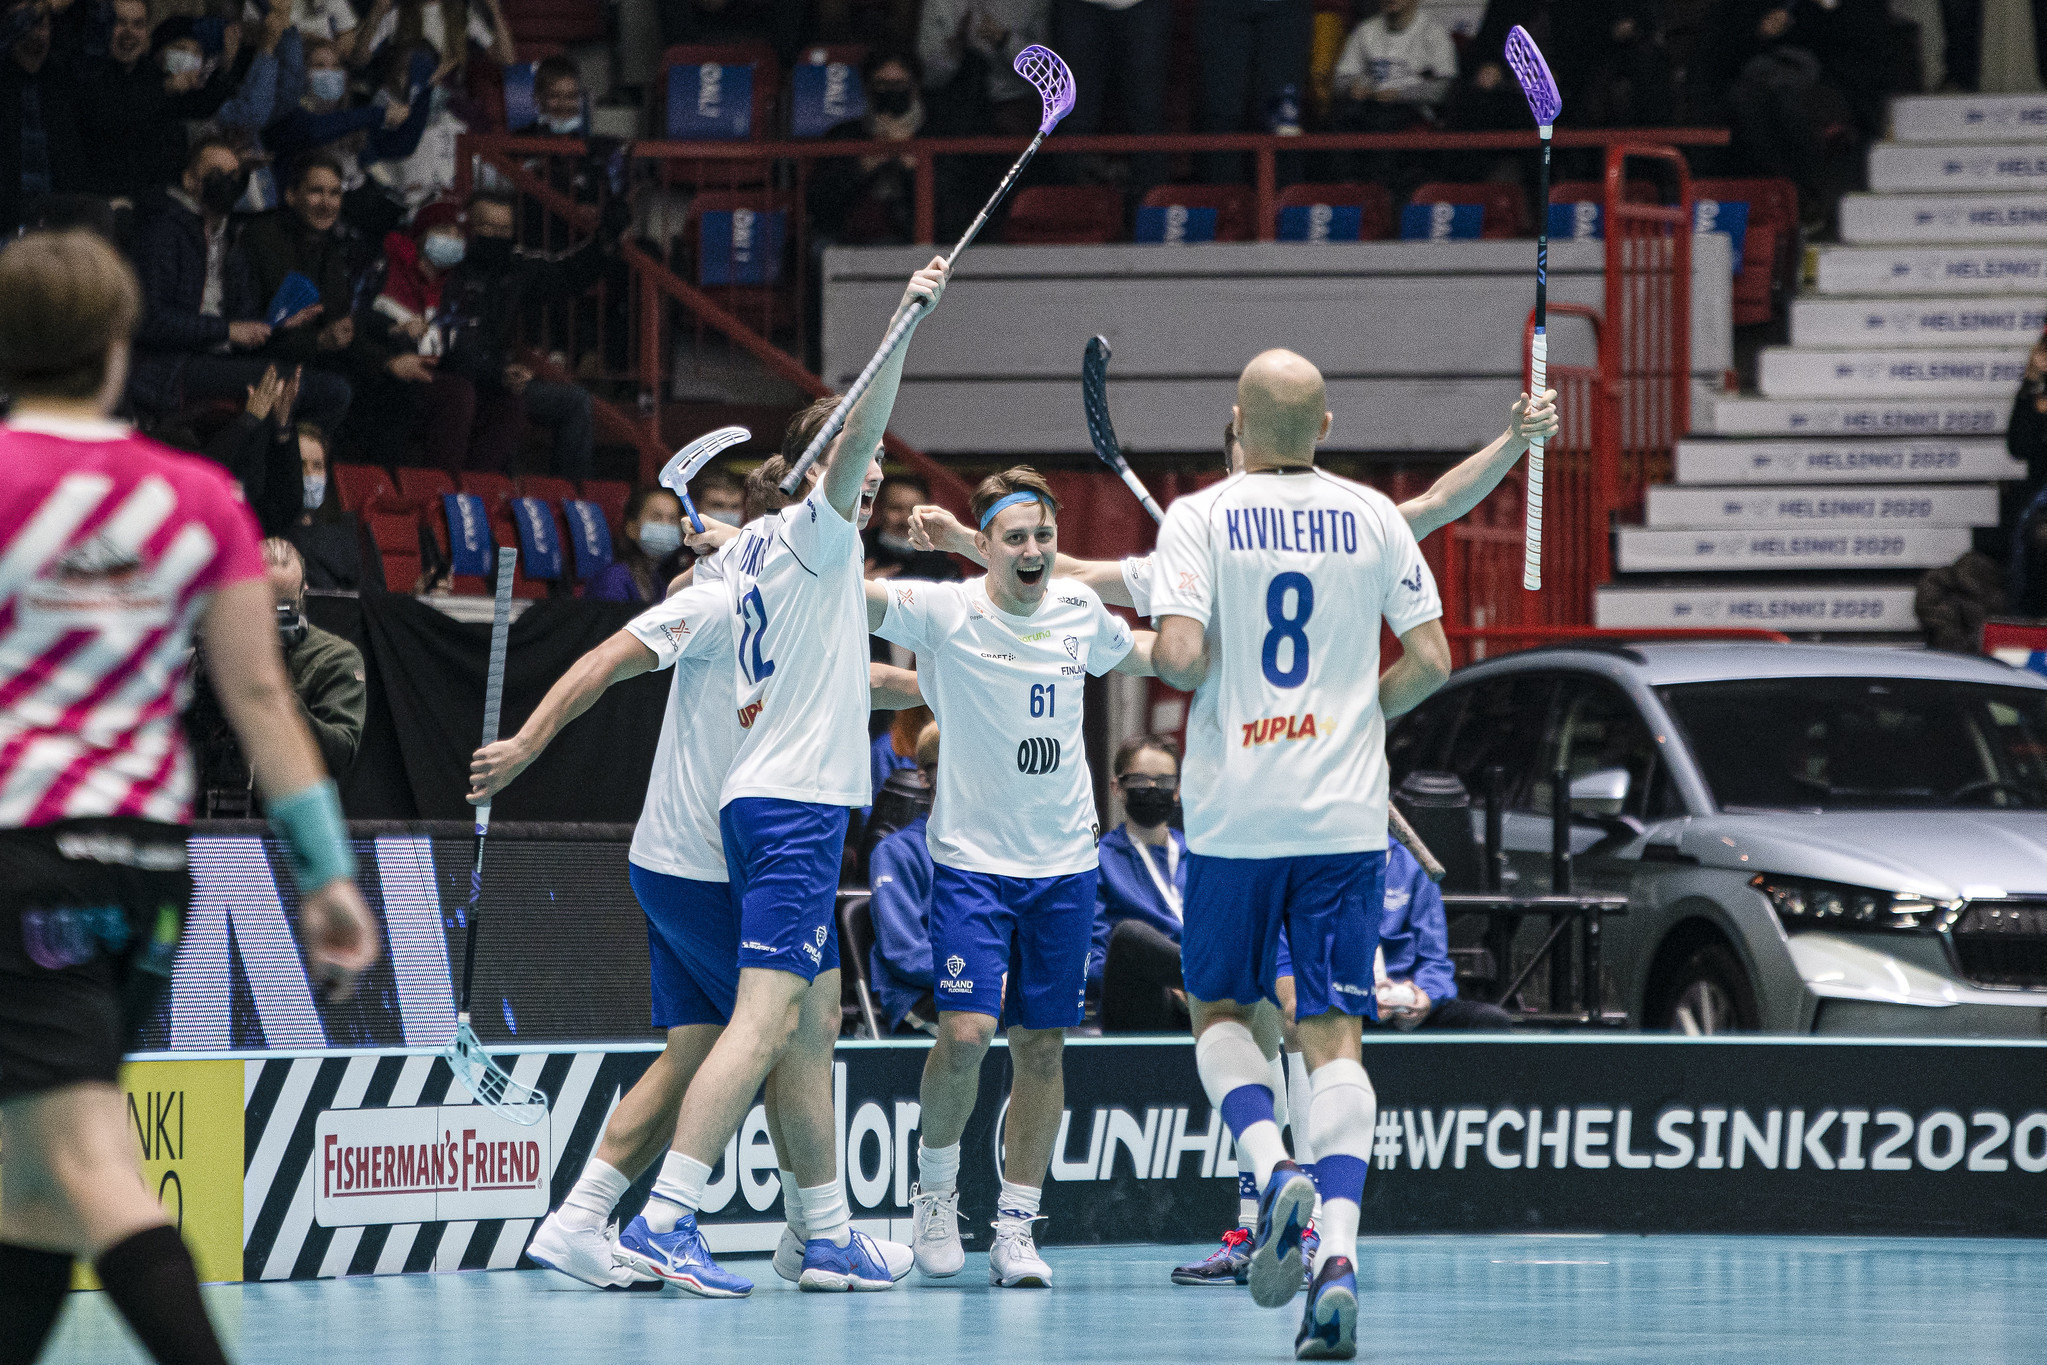 Last year's runners-up Finland are among 12 teams to have already qualified for this year's Men's World Floorball Championship ©IFF